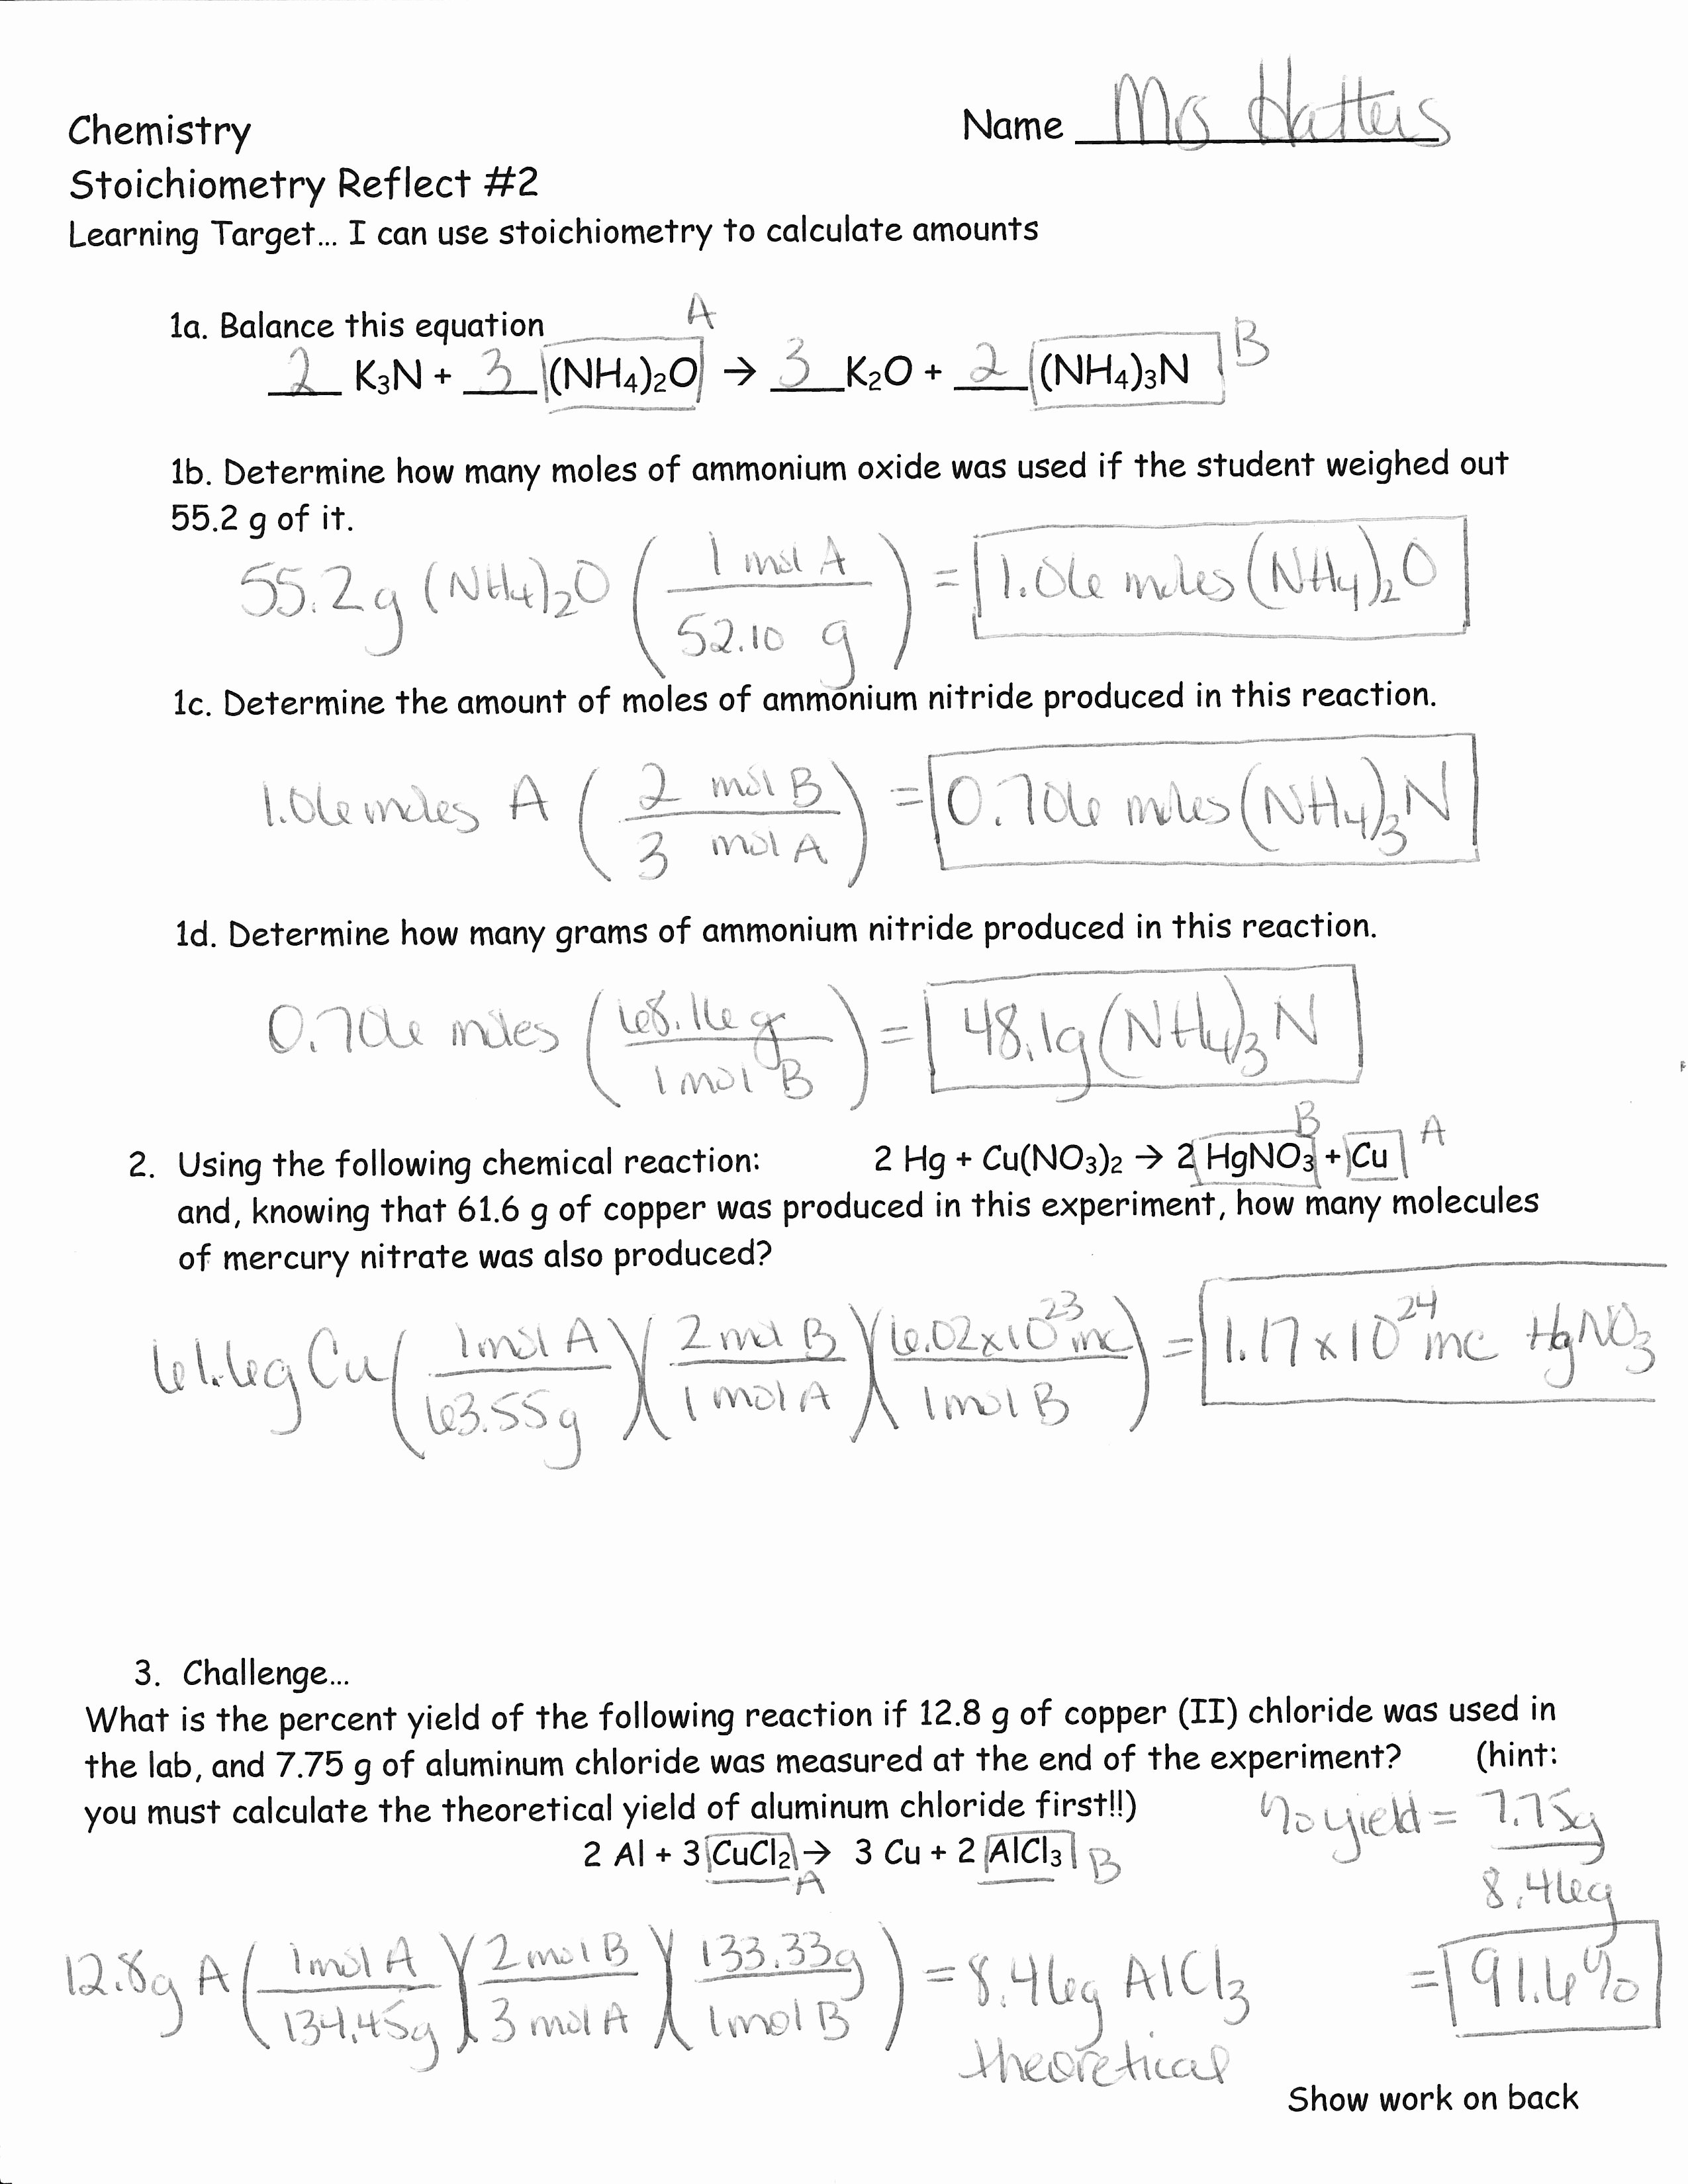 Stoichiometry Worksheet Answer Key Awesome Announcements Stoichiometry Test Review Answer Keys